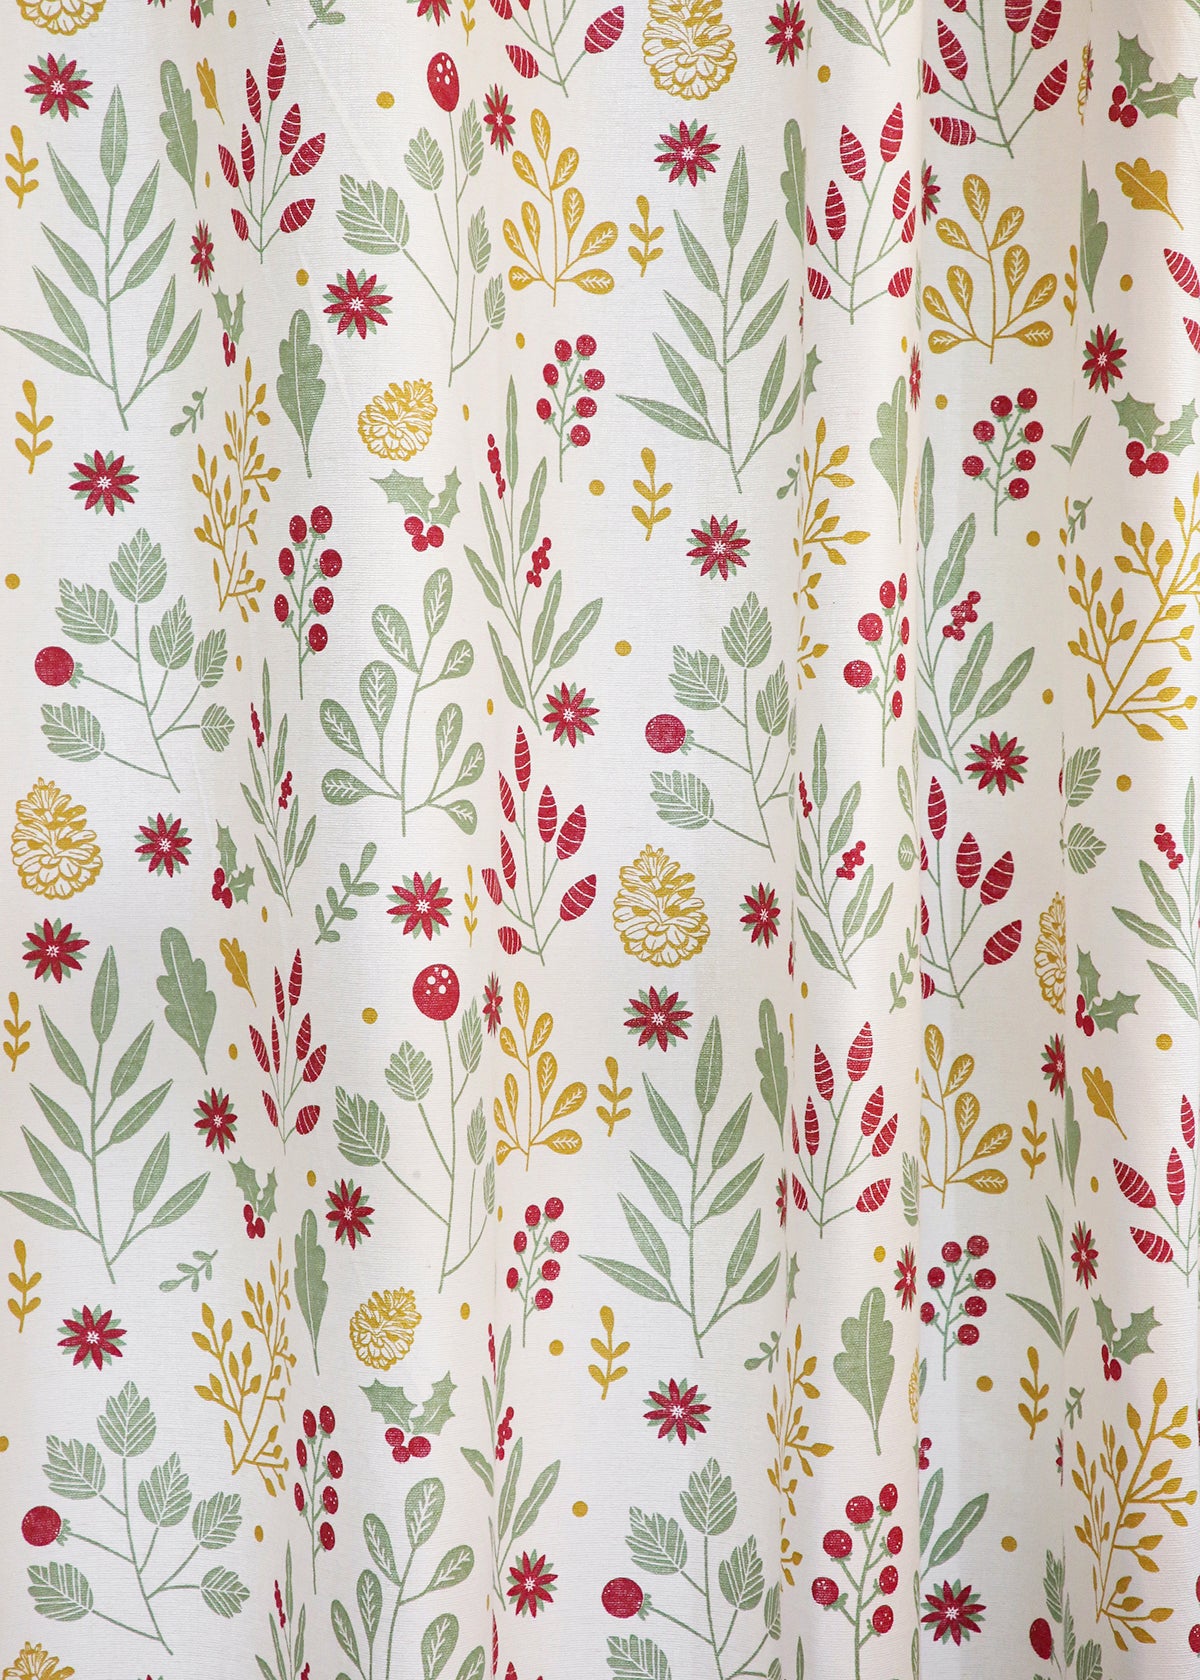 Foraged Berries printed cotton Fabric - Multicolor